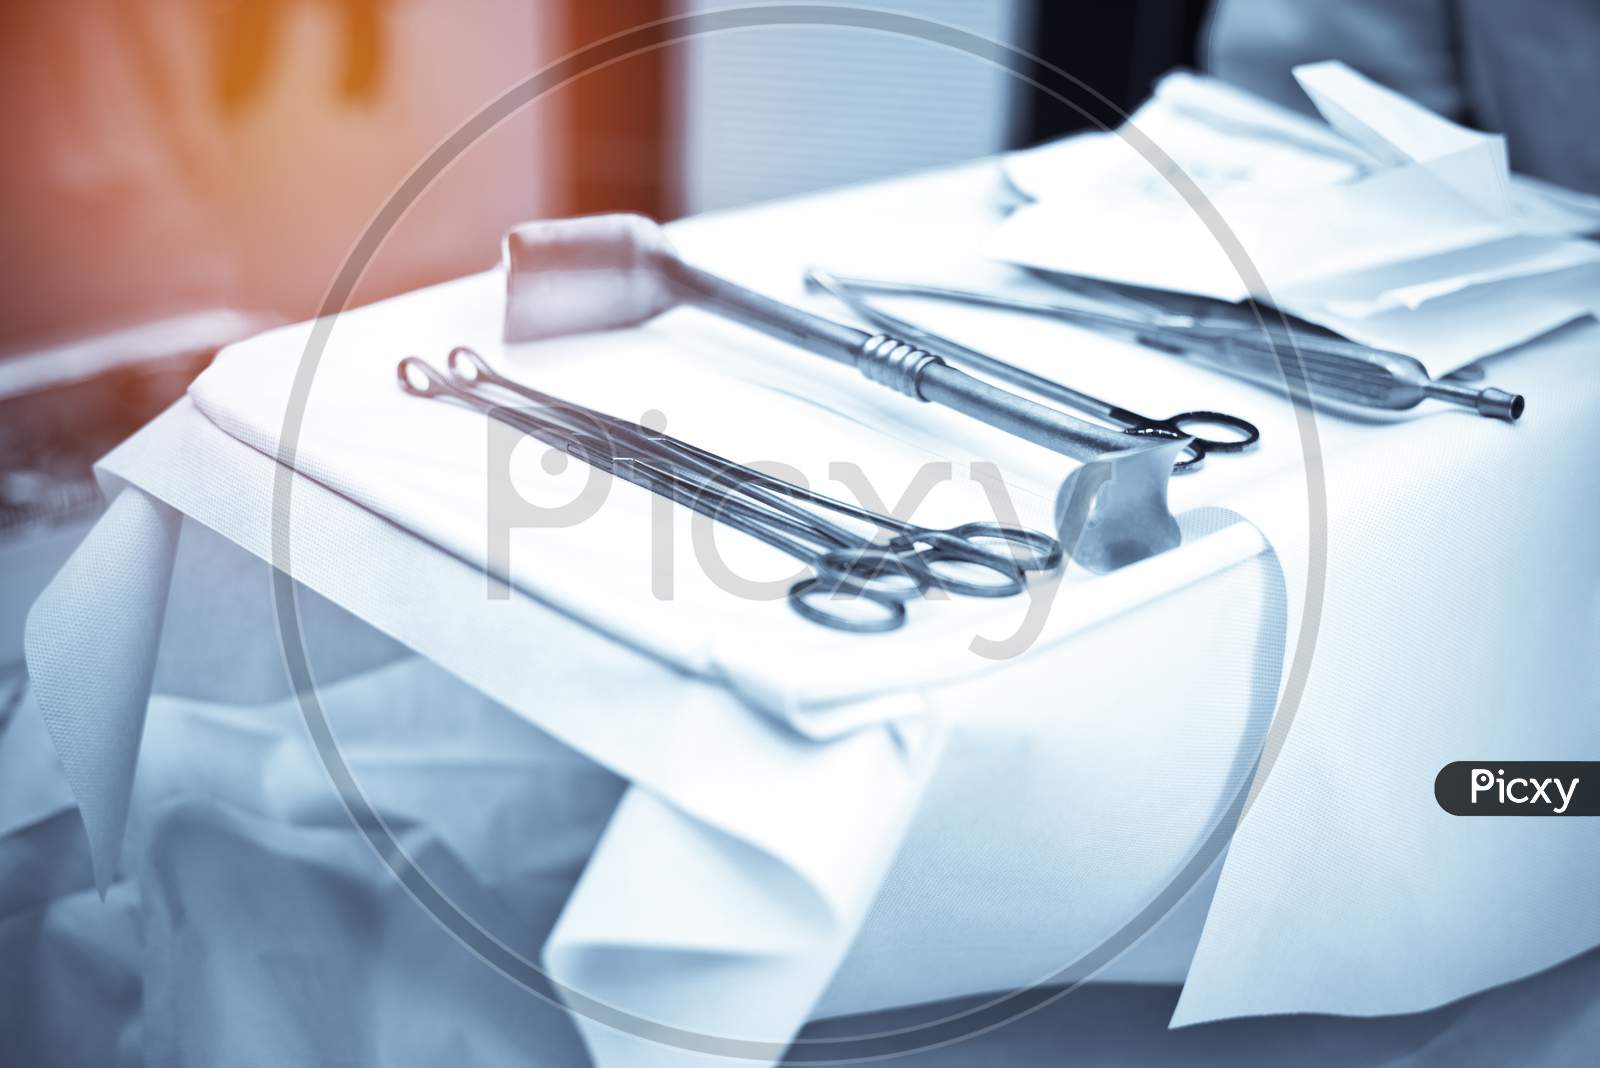 Surgery Instrument And Tools Set On White Sterile Fabric In Operating Room At Hospital. Medical And Healthcare Concept. Emergency And Life Rescue Concept. Operation Room Theme.